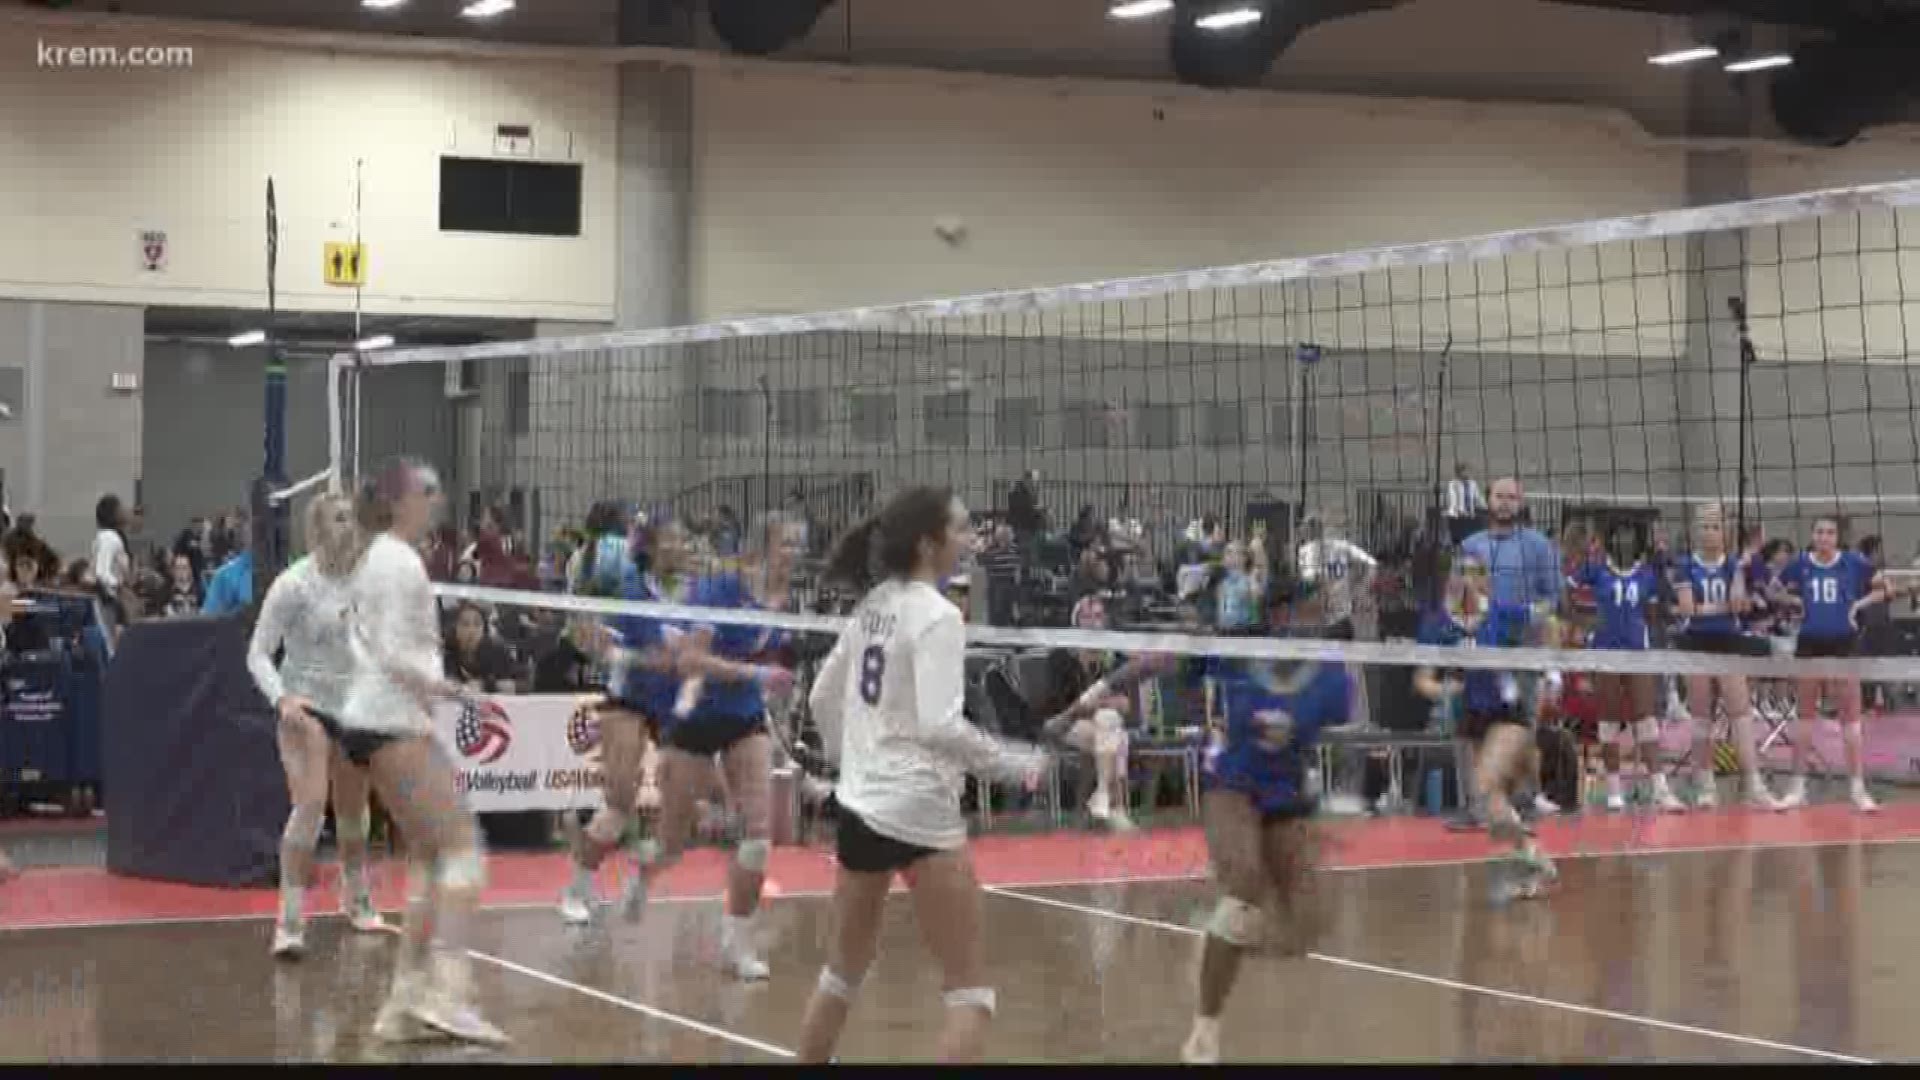 KREM Reporter Casey Decker visited the Pacific Northwest Qualifier, a teen volleyball tournament and the biggest annual event in Spokane.